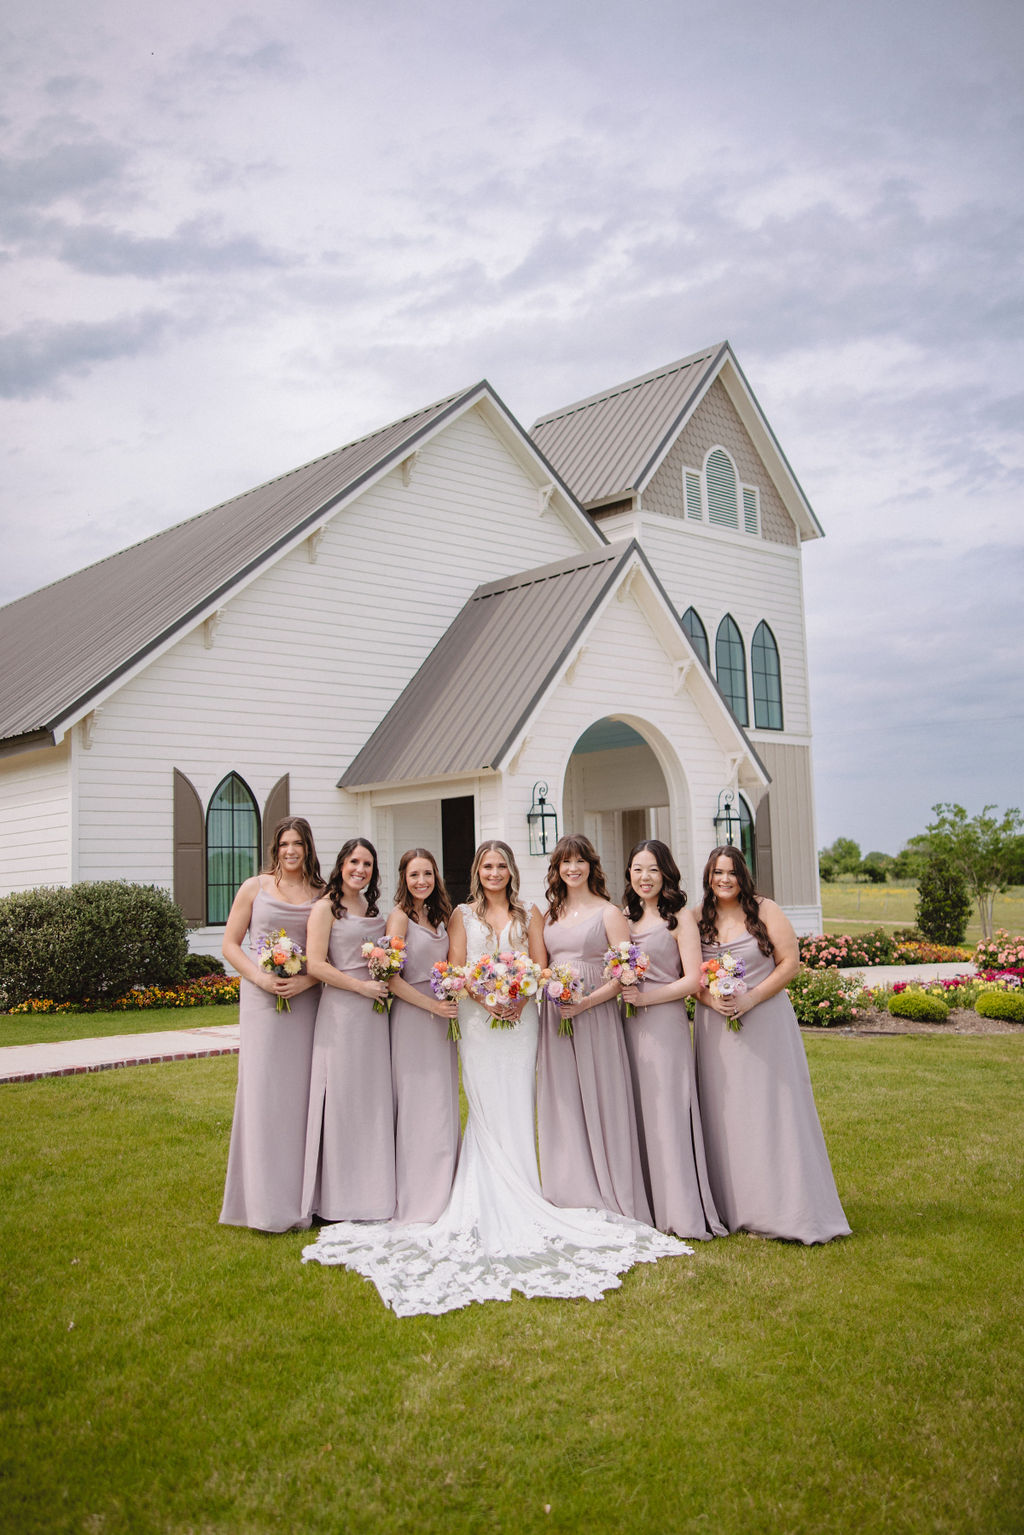 A bride and five bridesmaids in lavender dresses, holding bouquets of flowers, stand together smiling in front of a white chapel on a cloudy day at deep in the heart farms